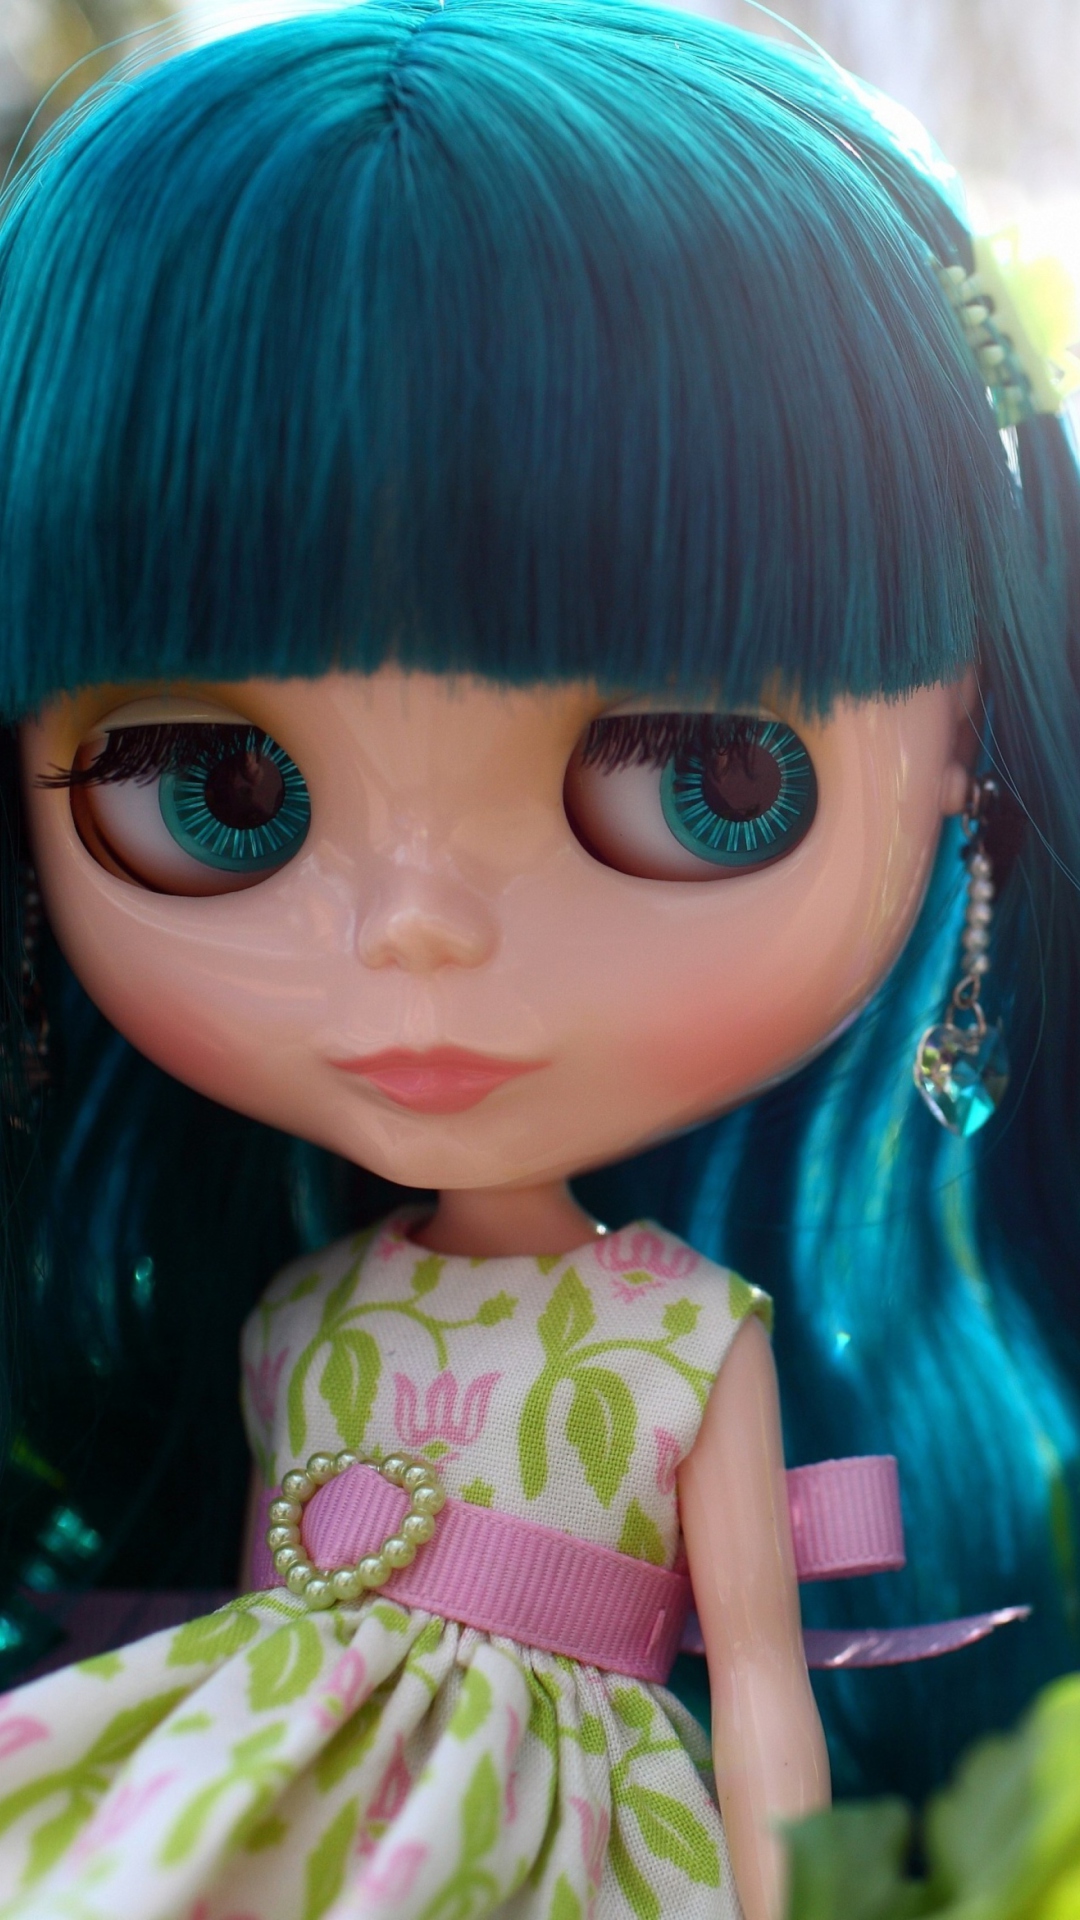 Doll With Blue Hair wallpaper 1080x1920